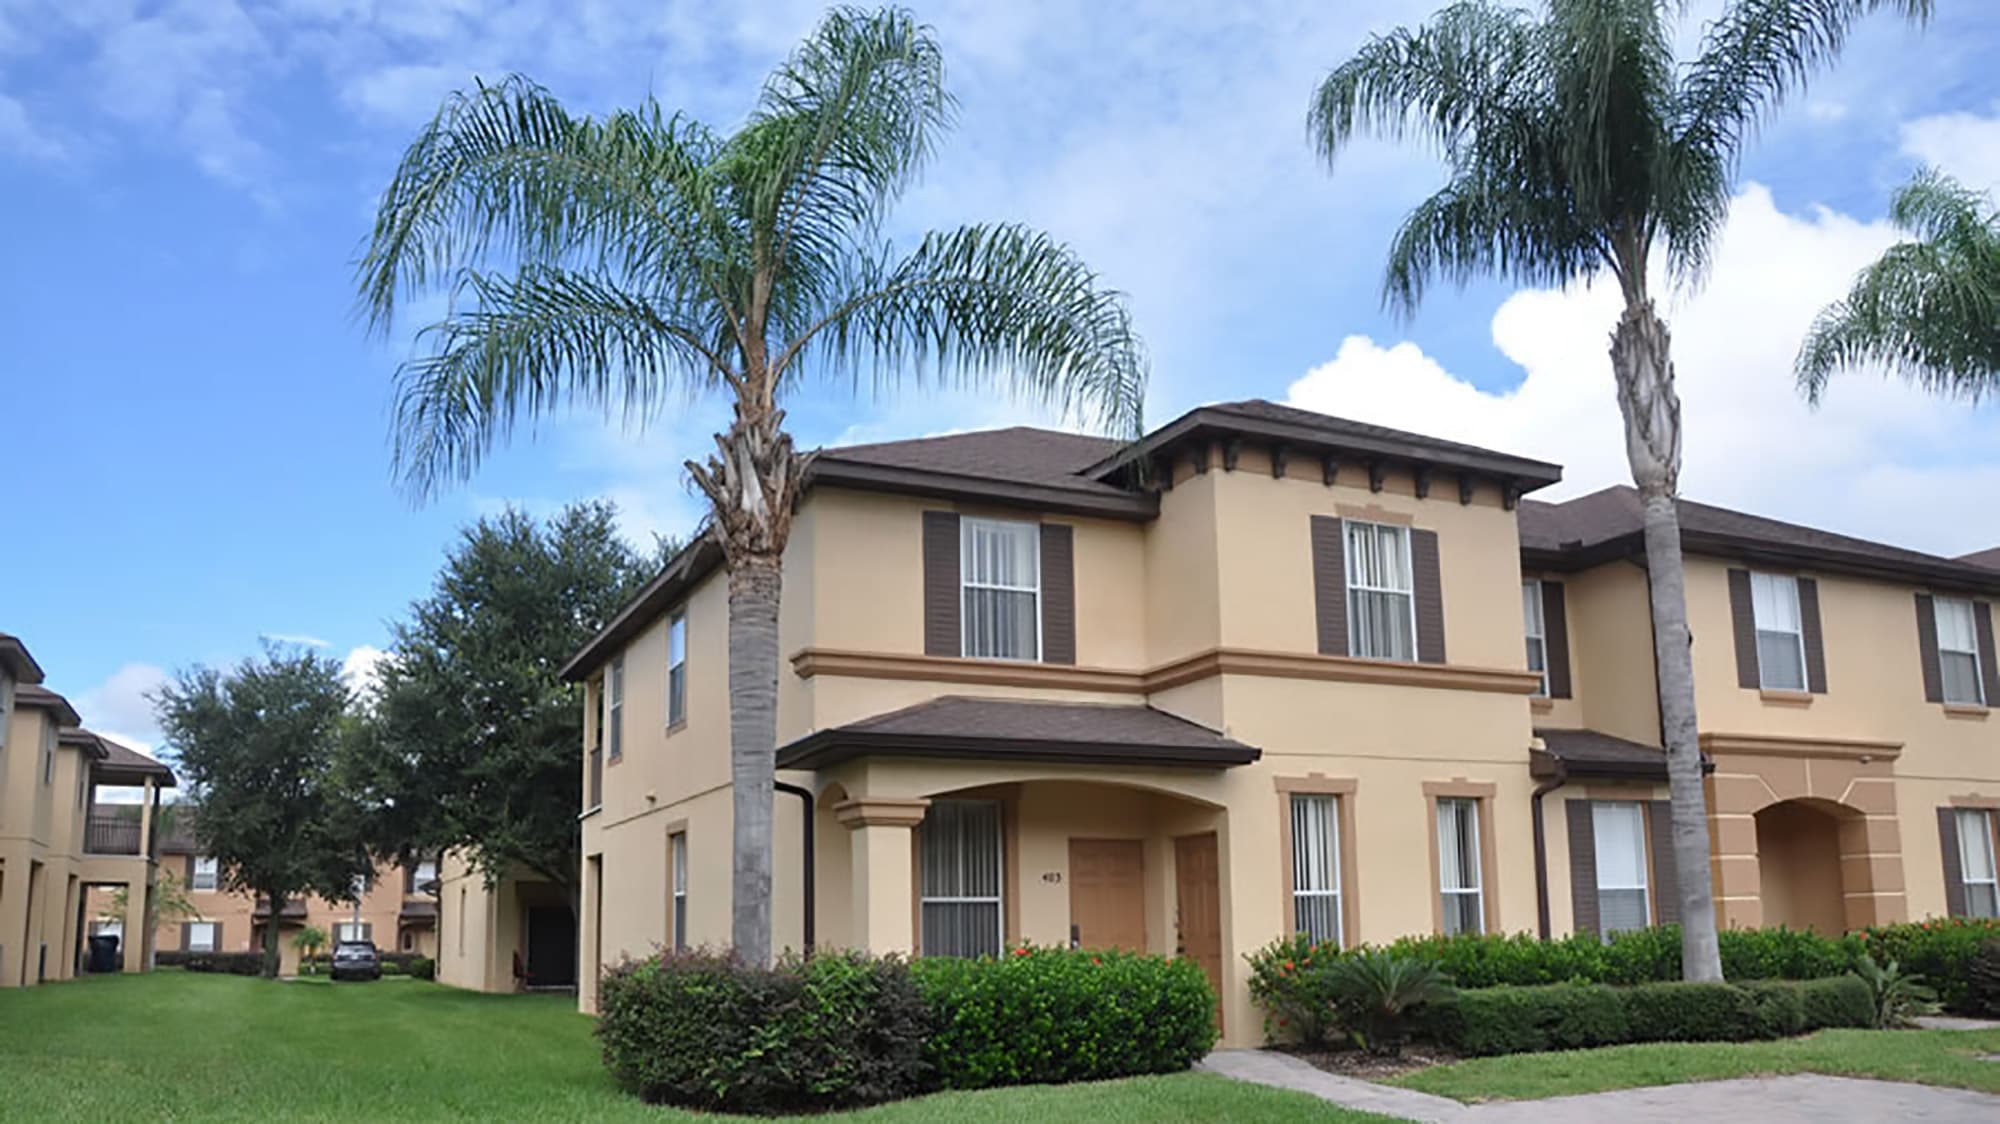 exterior of townhome at Regal Palms in Davenport, available for rent through SunKiss Villas